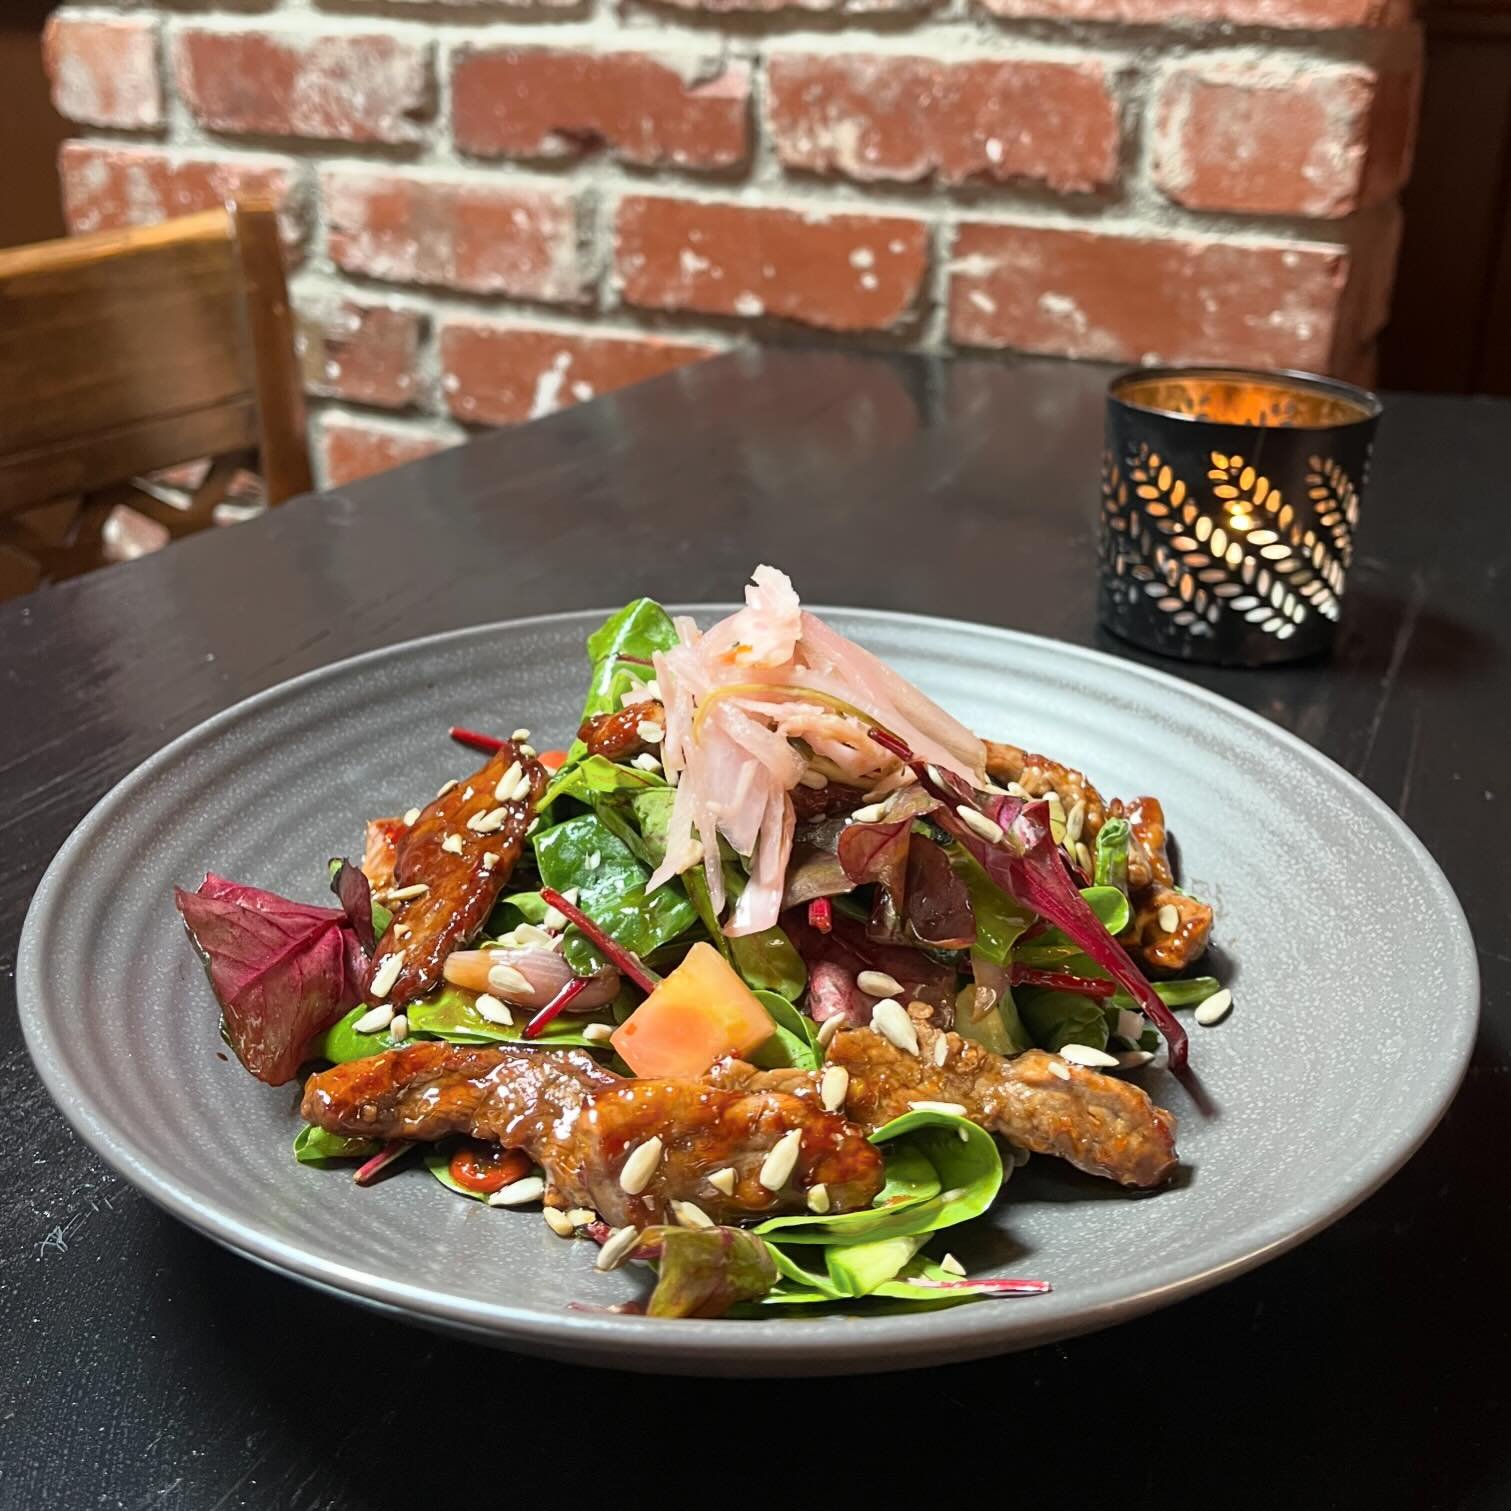 Yakitori Beef Salad at @buffaloboy_steakhouse 
Beef Marinated in a Spicy Soy Sauce, Mixed Leaves, Ribbon of Carrots, Pickled Veg, Mixed Seeds &amp; Sesame Dressing #buffaloboysteakhouse #carrickonshannon #leitrim #leitrimireland #leitrimobserver